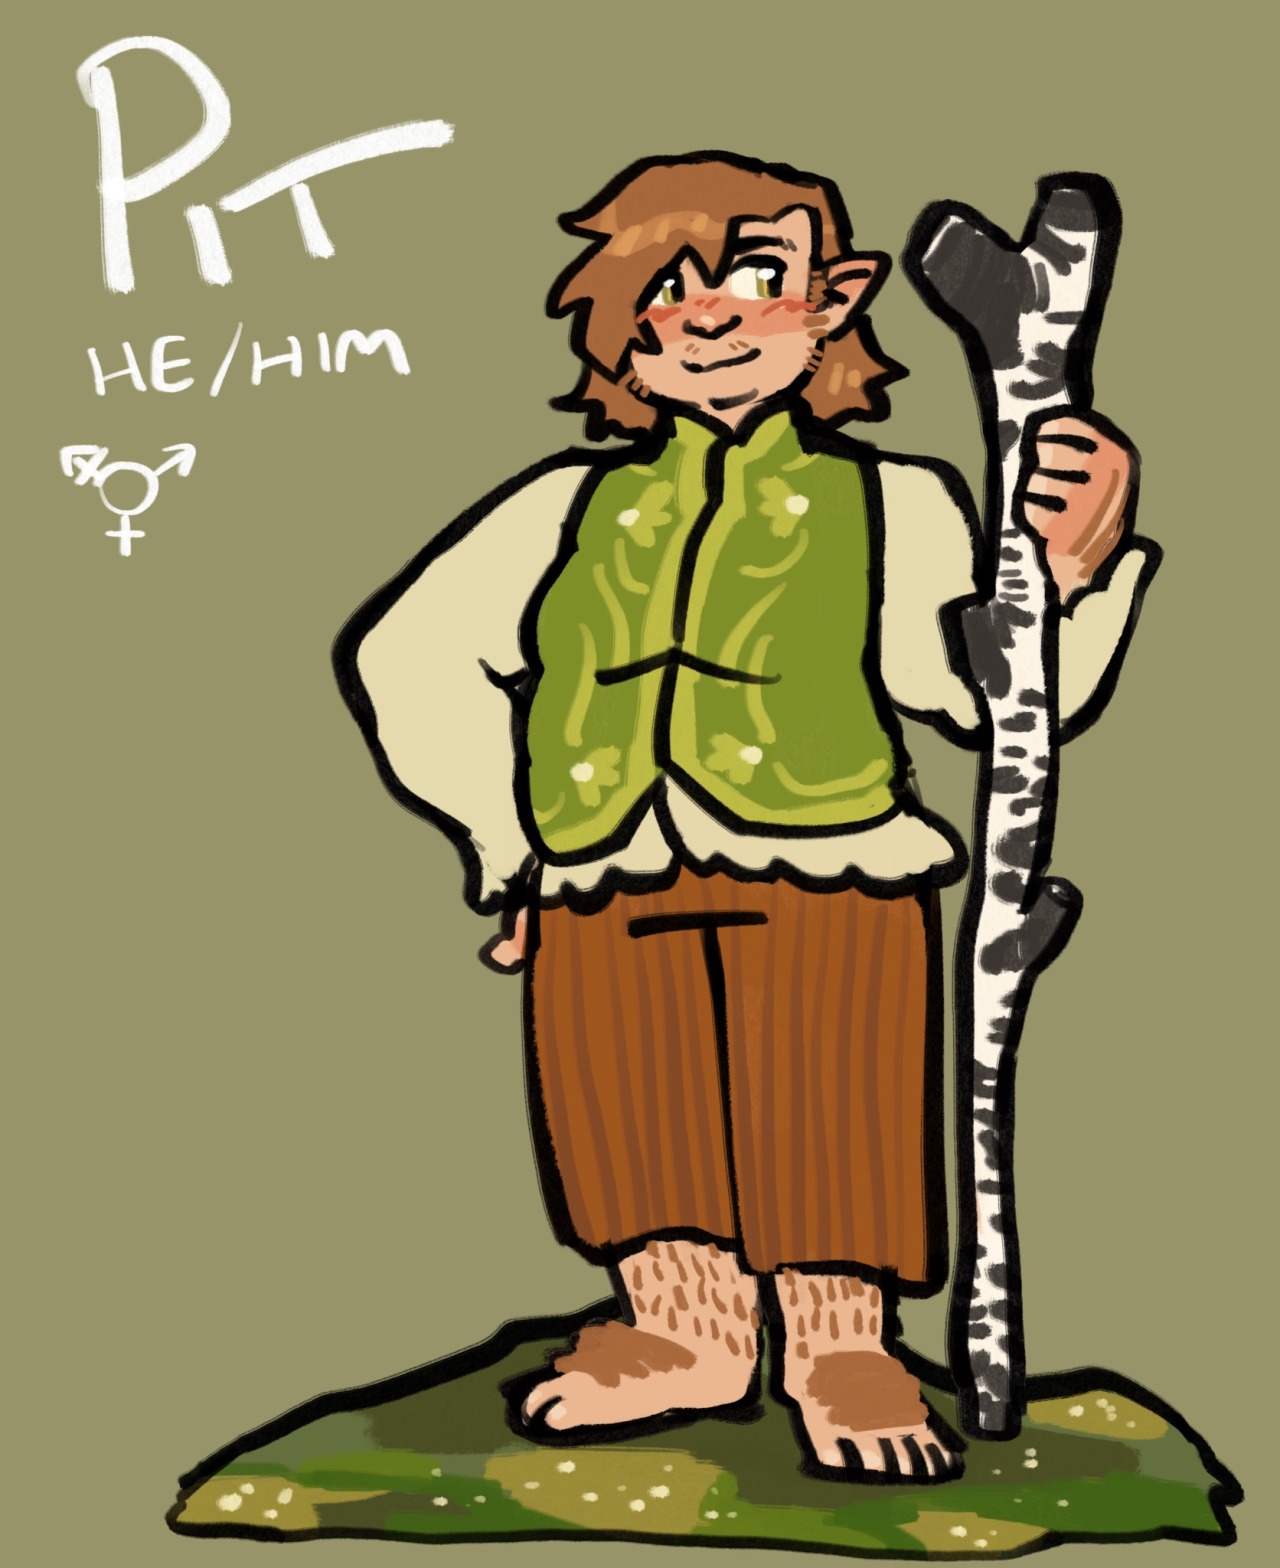 a drawing of pit, a fat transgender hobbit man, standing on some moss with a birch branch for a walking stick. he is white with ginger hair and whiskers, a white blouse and green patterned vest, and orange-brown corduroy pants that cut off below the knee. his feet are bare and hairy.